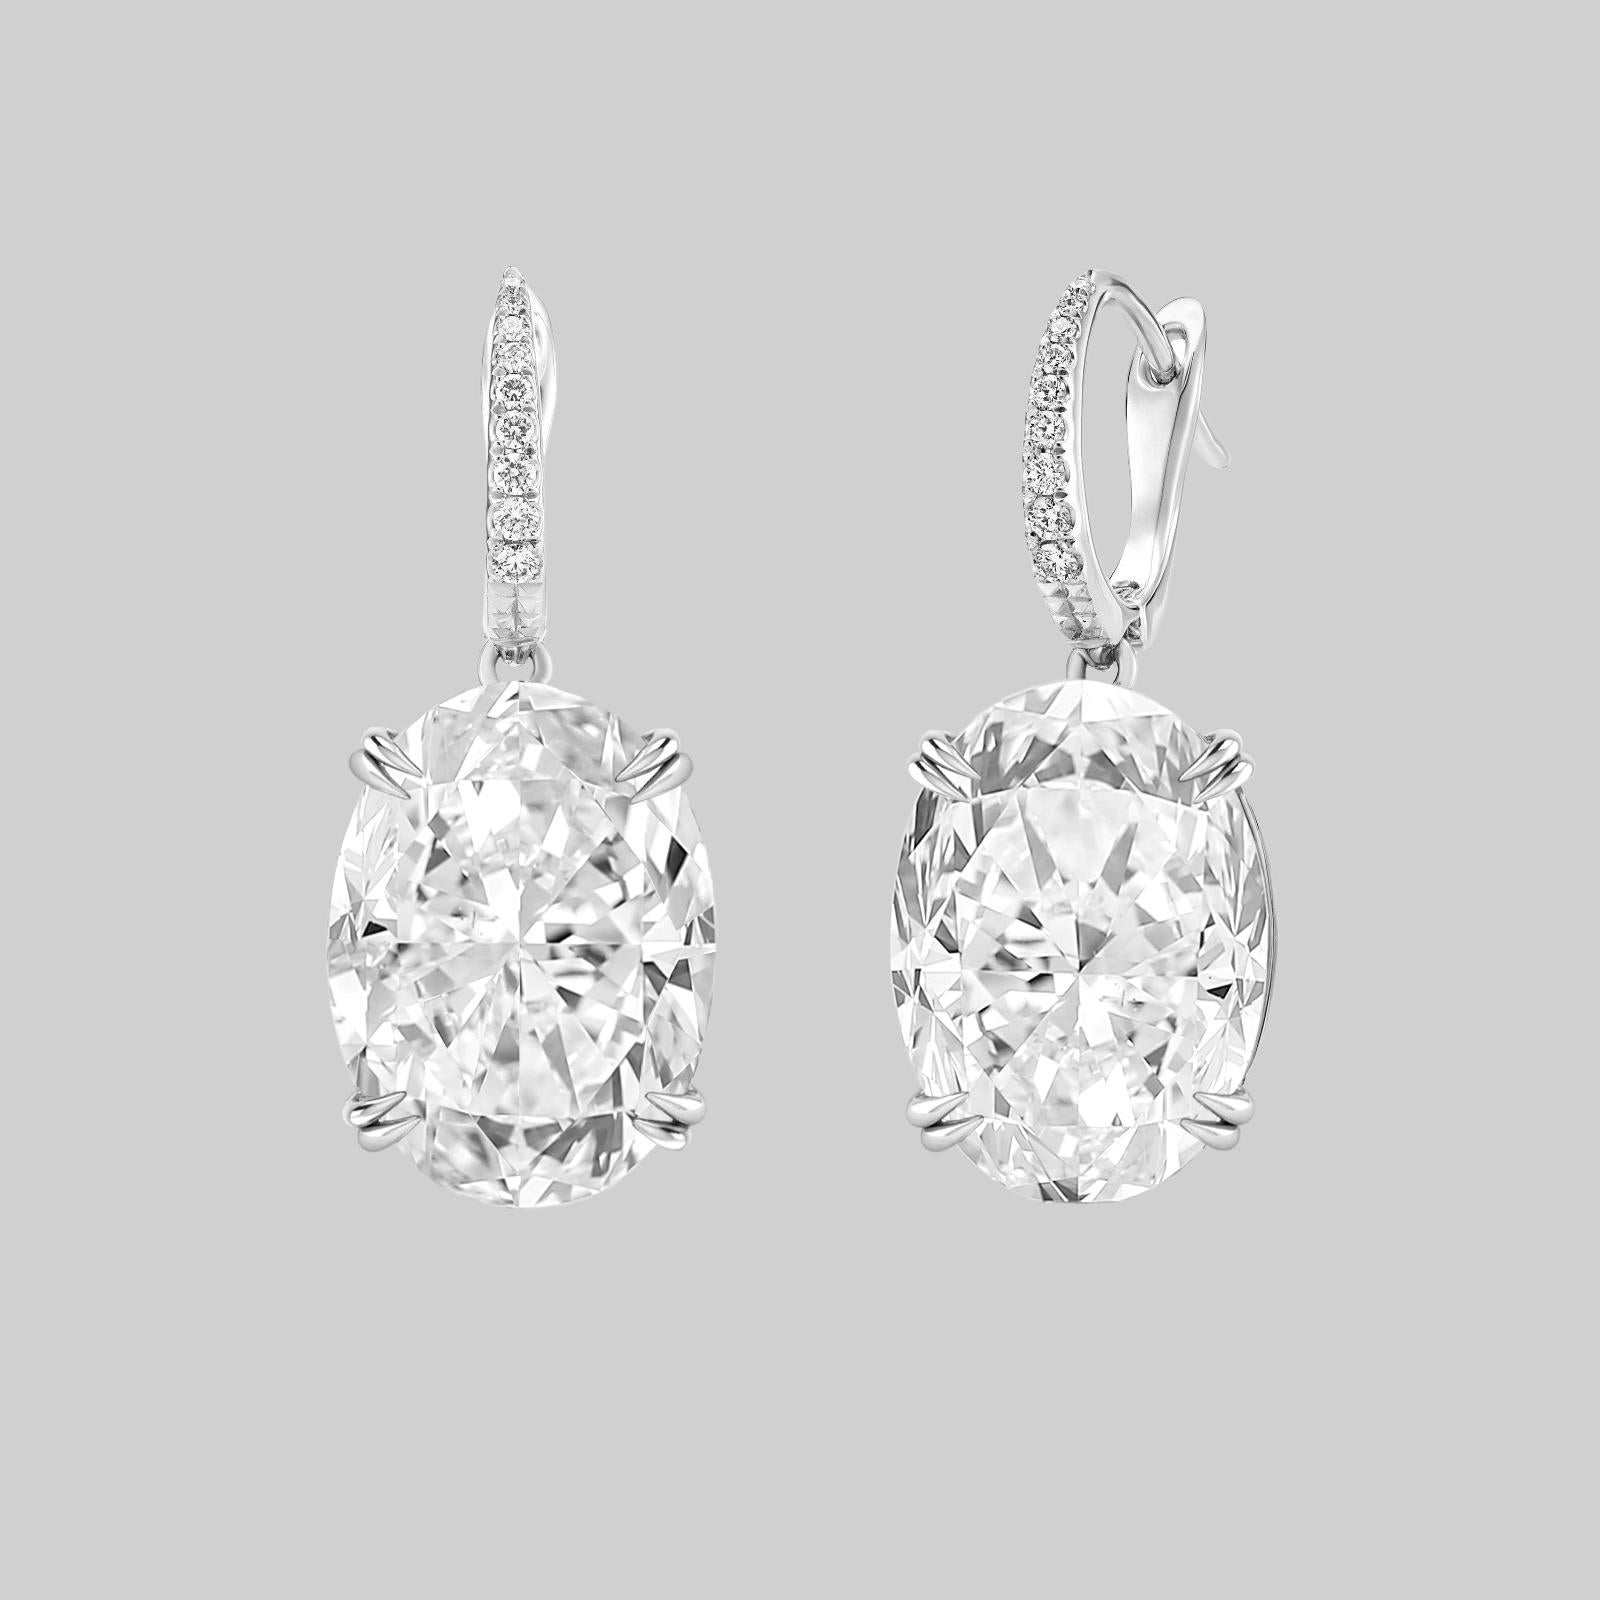 An exquisite pair of 8.03 carat oval diamonds certified by GIA
The diamonds are very bright and full of life and without fluorescence

